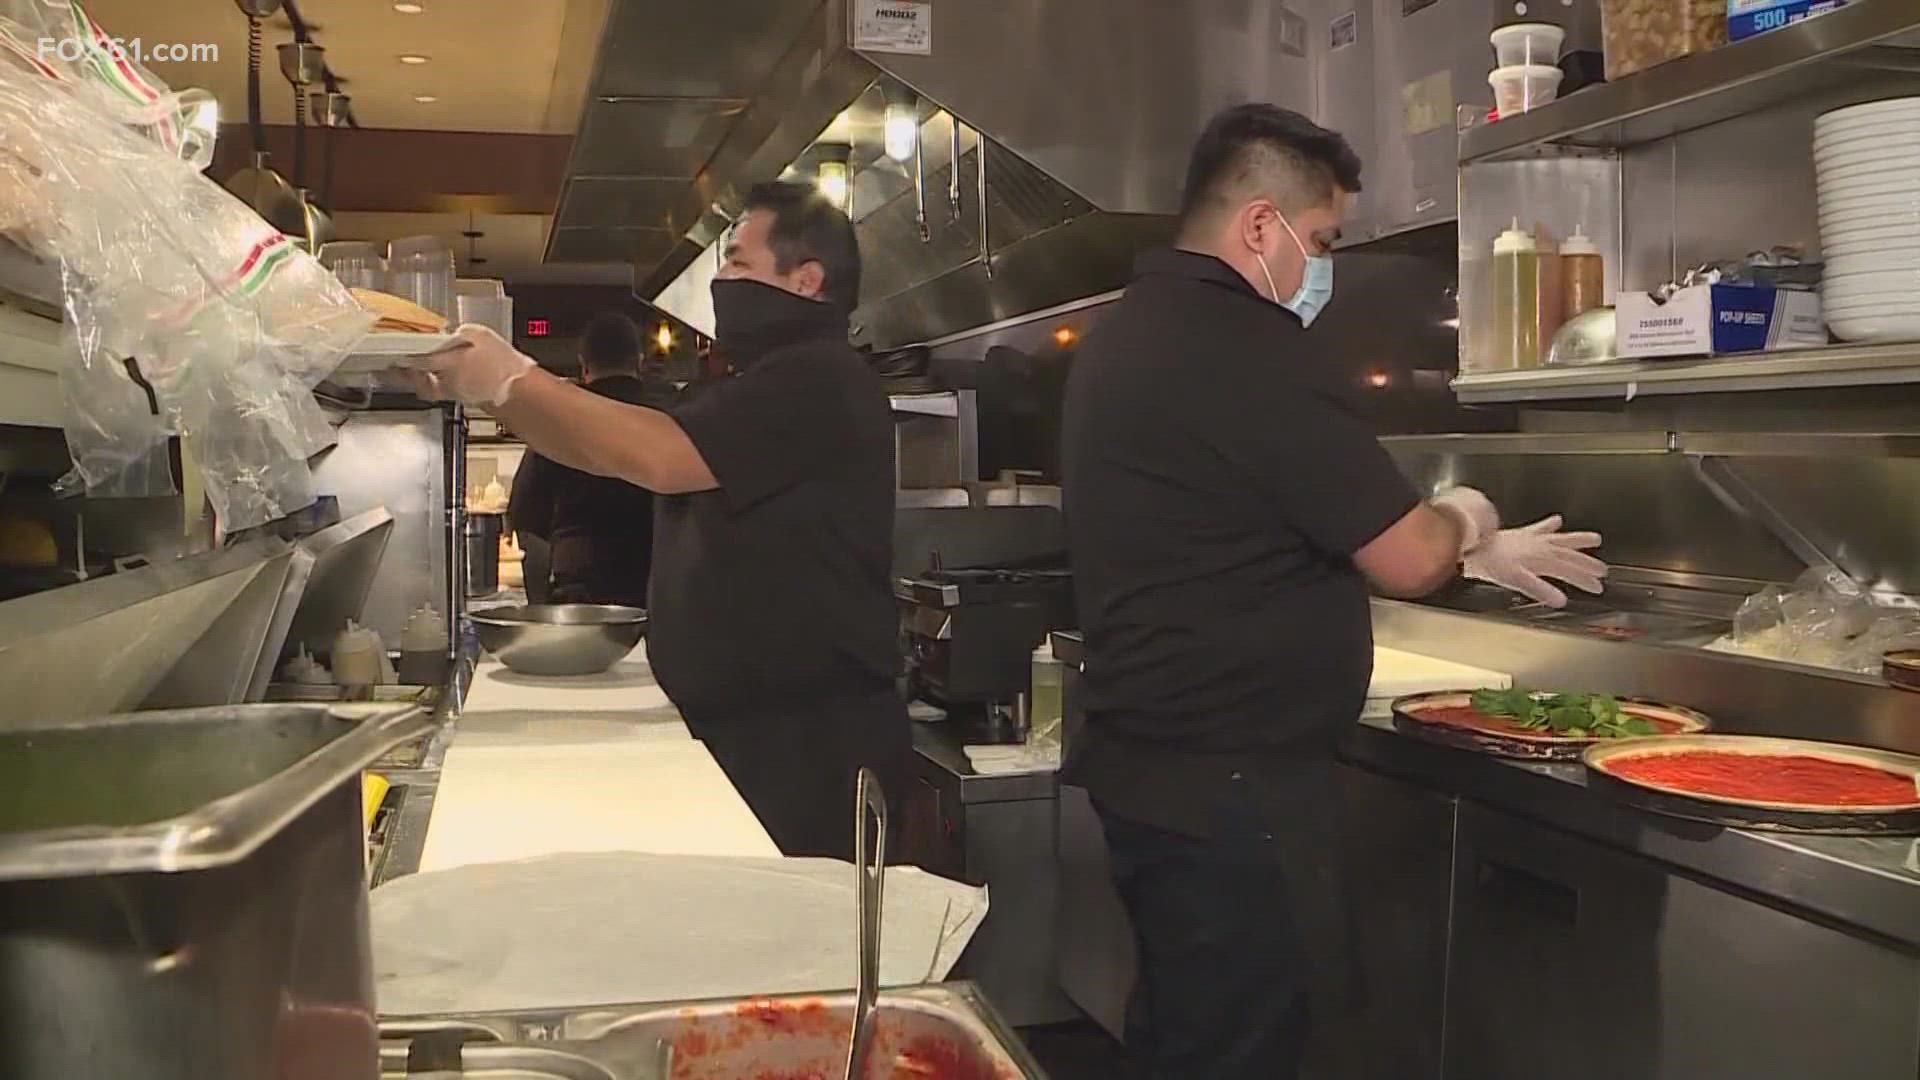 FOX61’s Matt Caron talked to some restaurateurs about their struggles and what they say they need to survive.